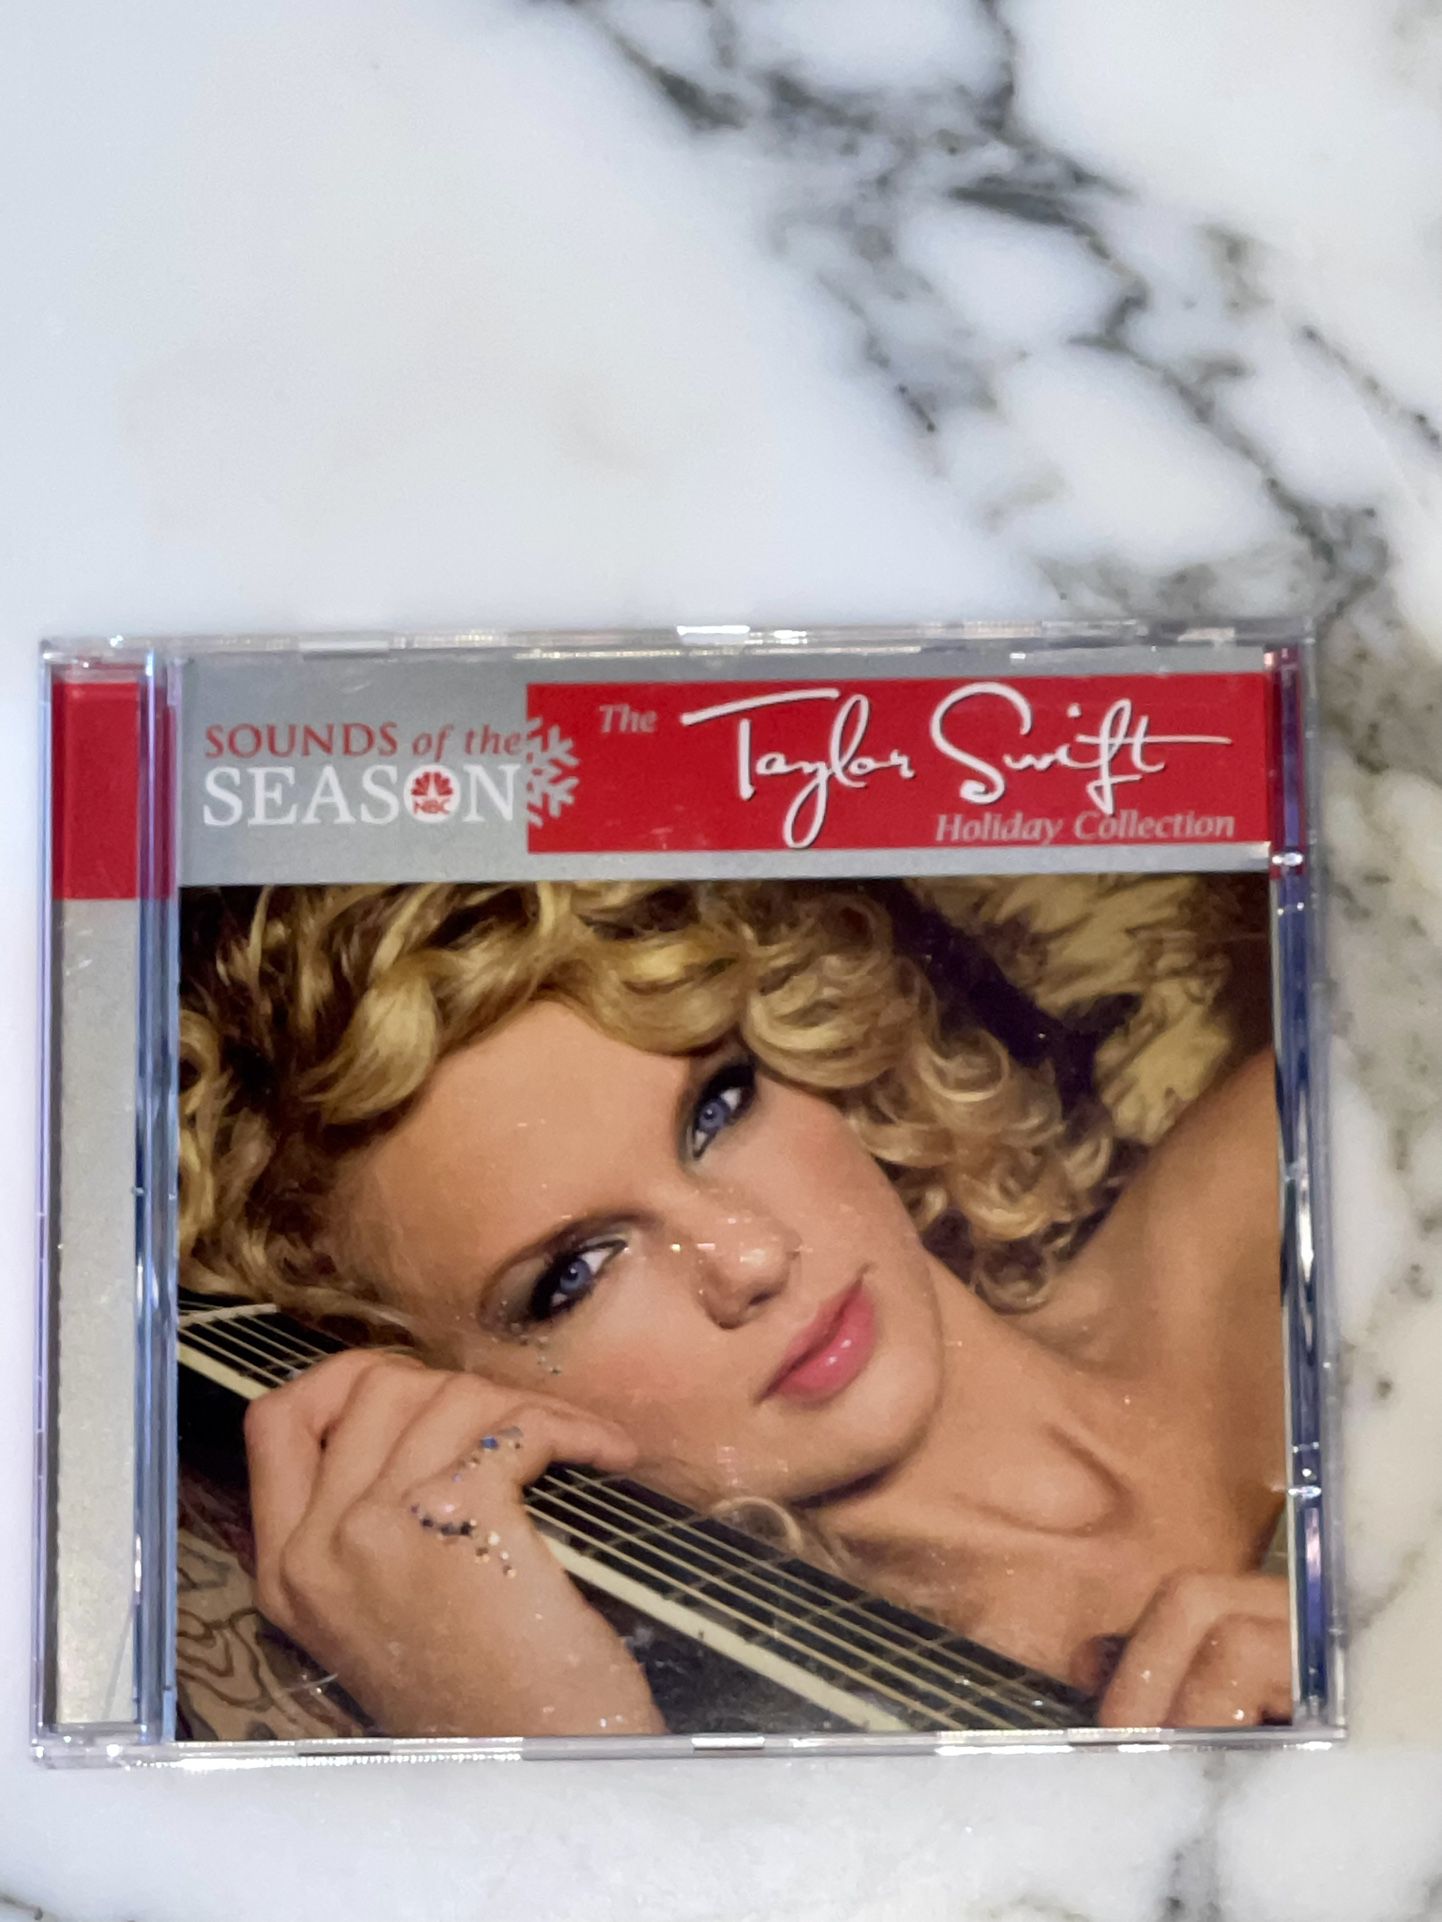 Taylor Swift Holiday Collection: Sounds of the Season (CD, 2007) 6 Tracks